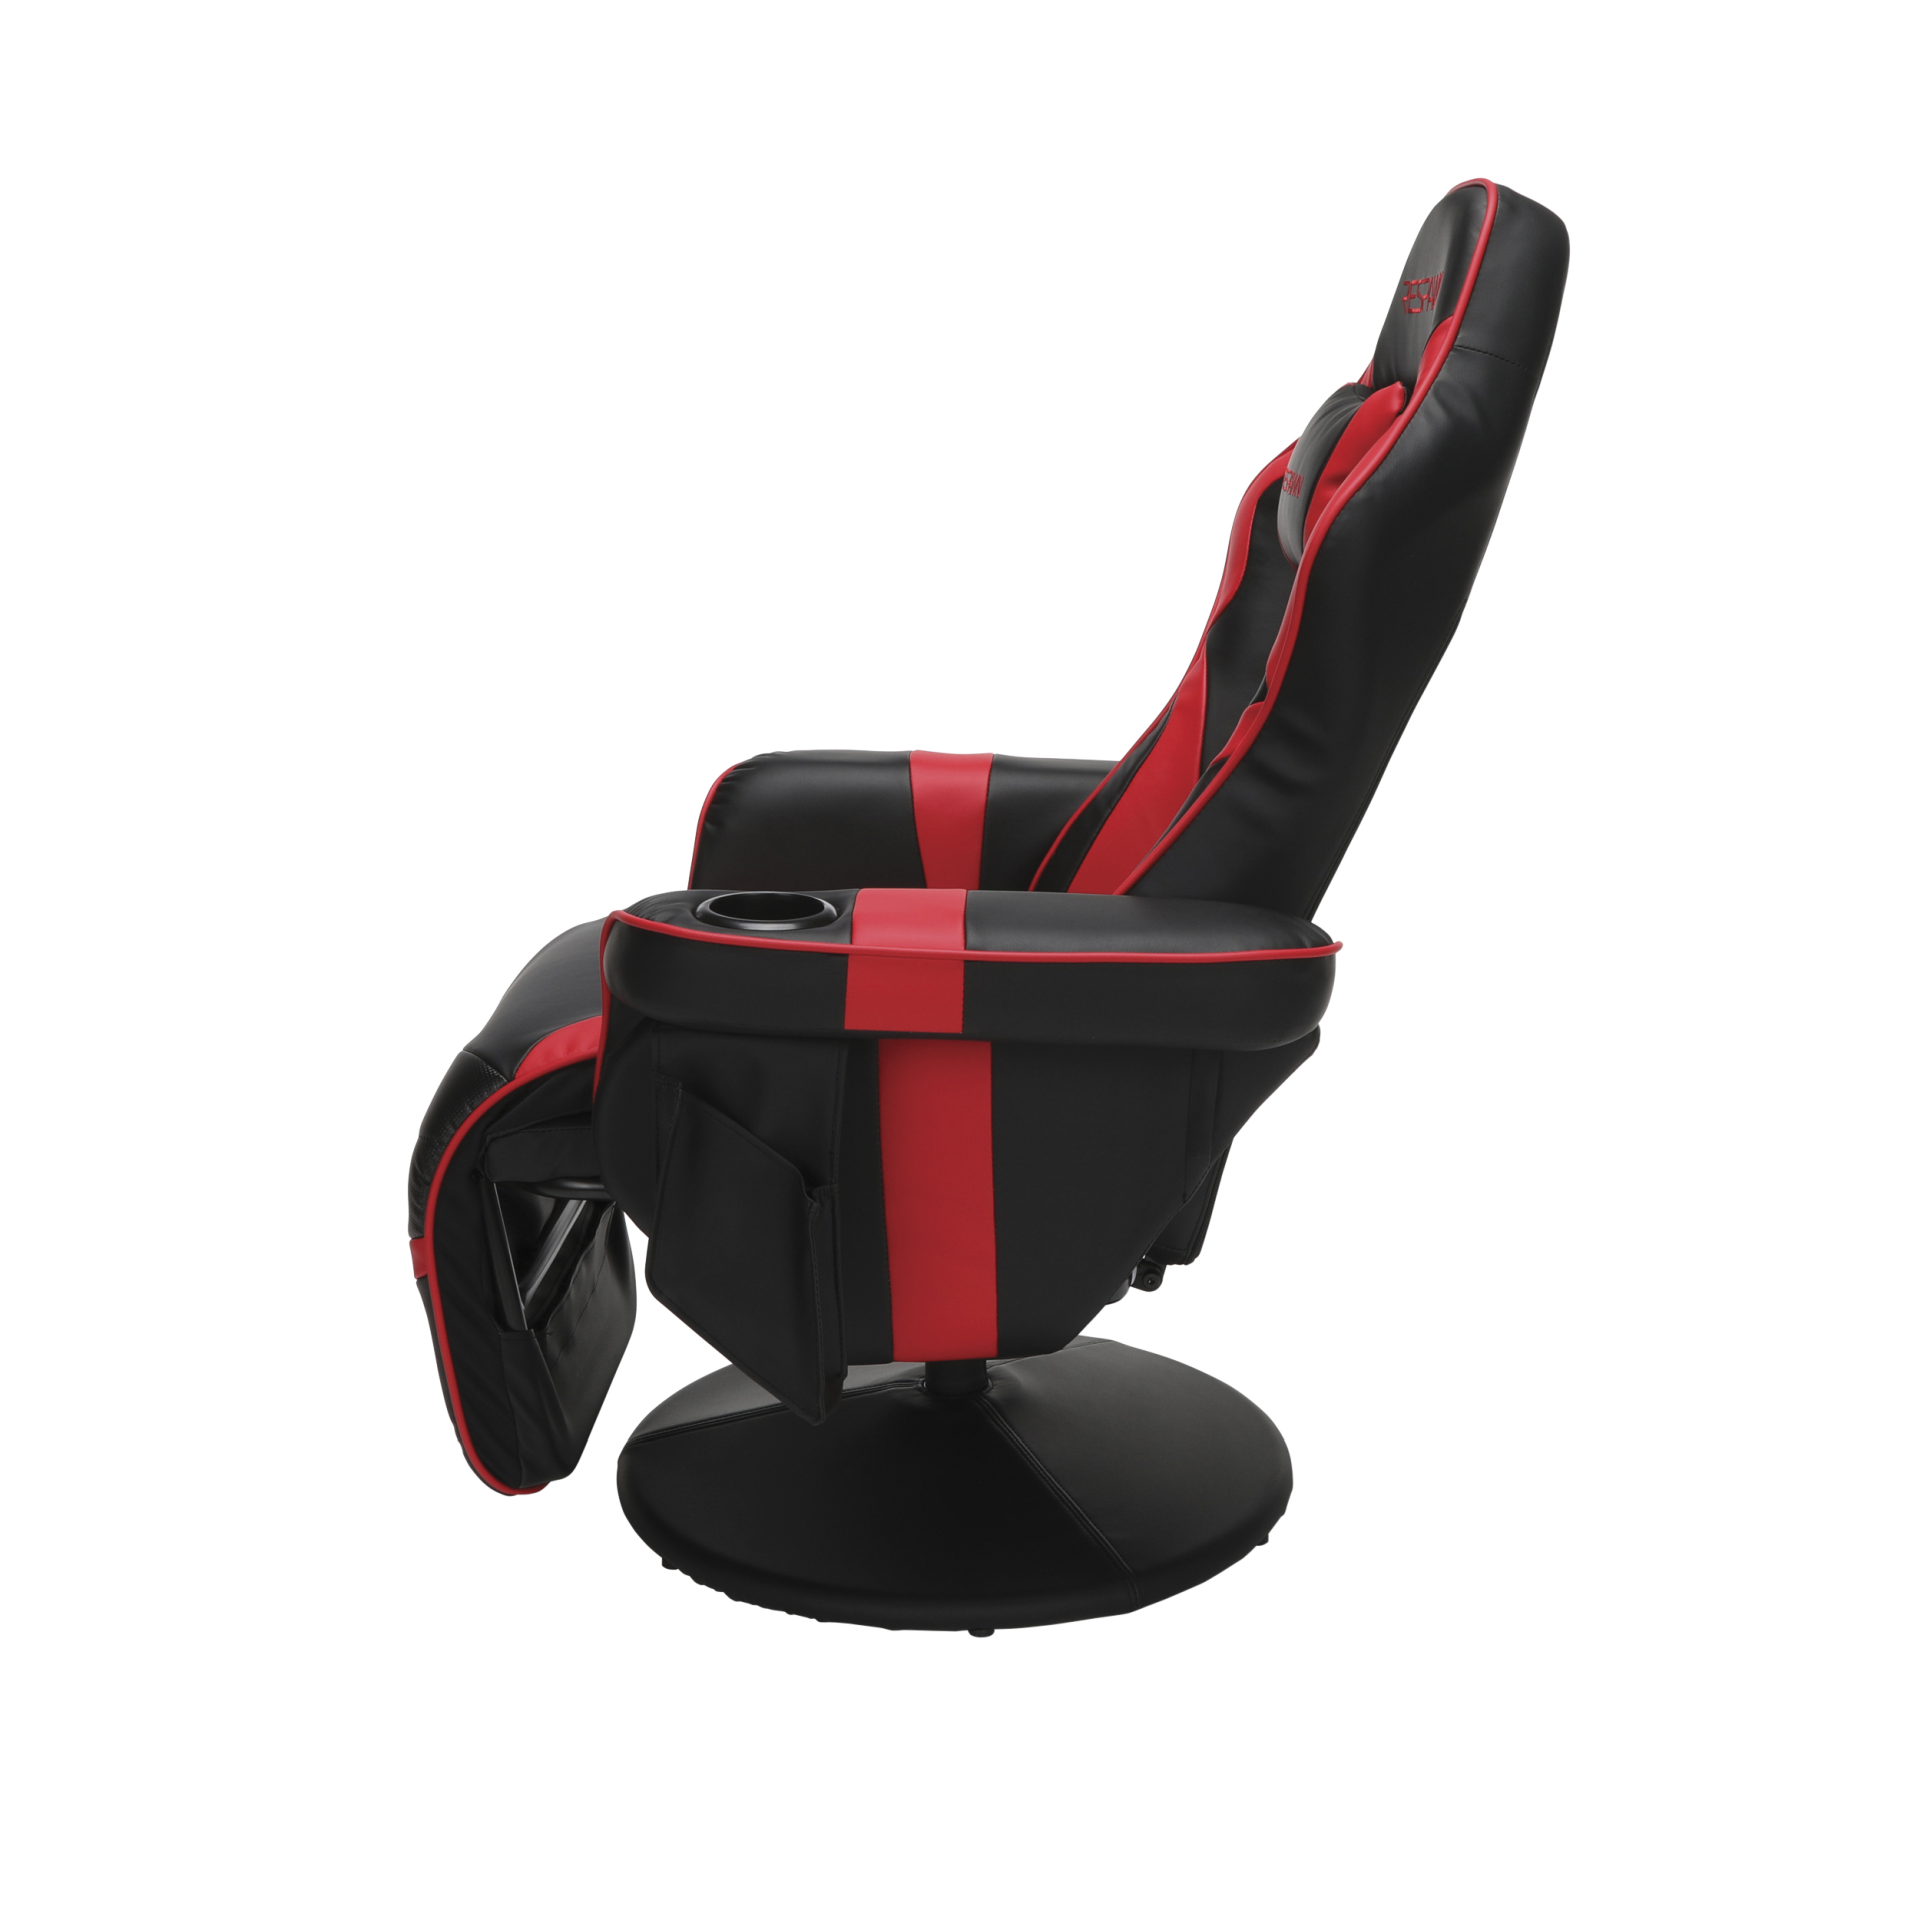 RESPAWN RSP-900 Gaming Recliner #27